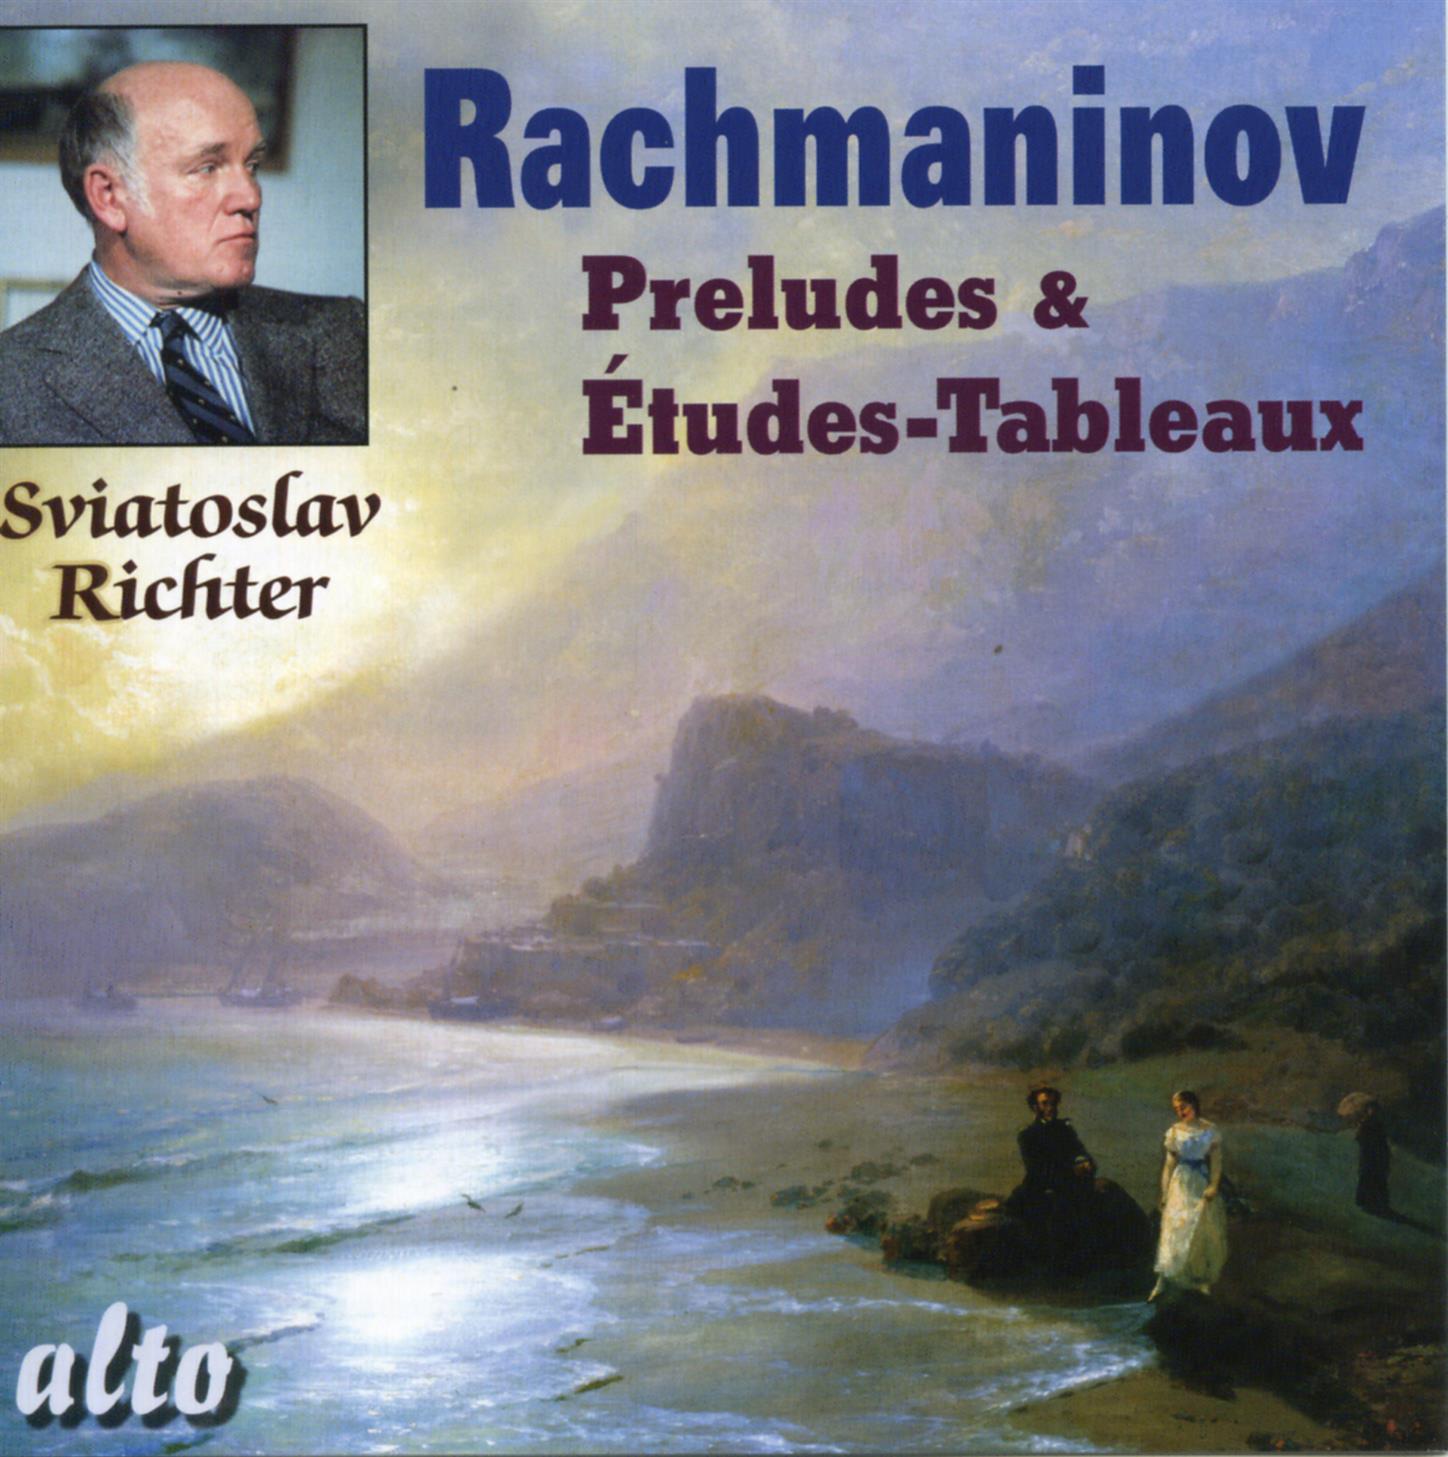 Etudes-tableaux for Piano Op.33: No.9 in C sharp minor. Grave